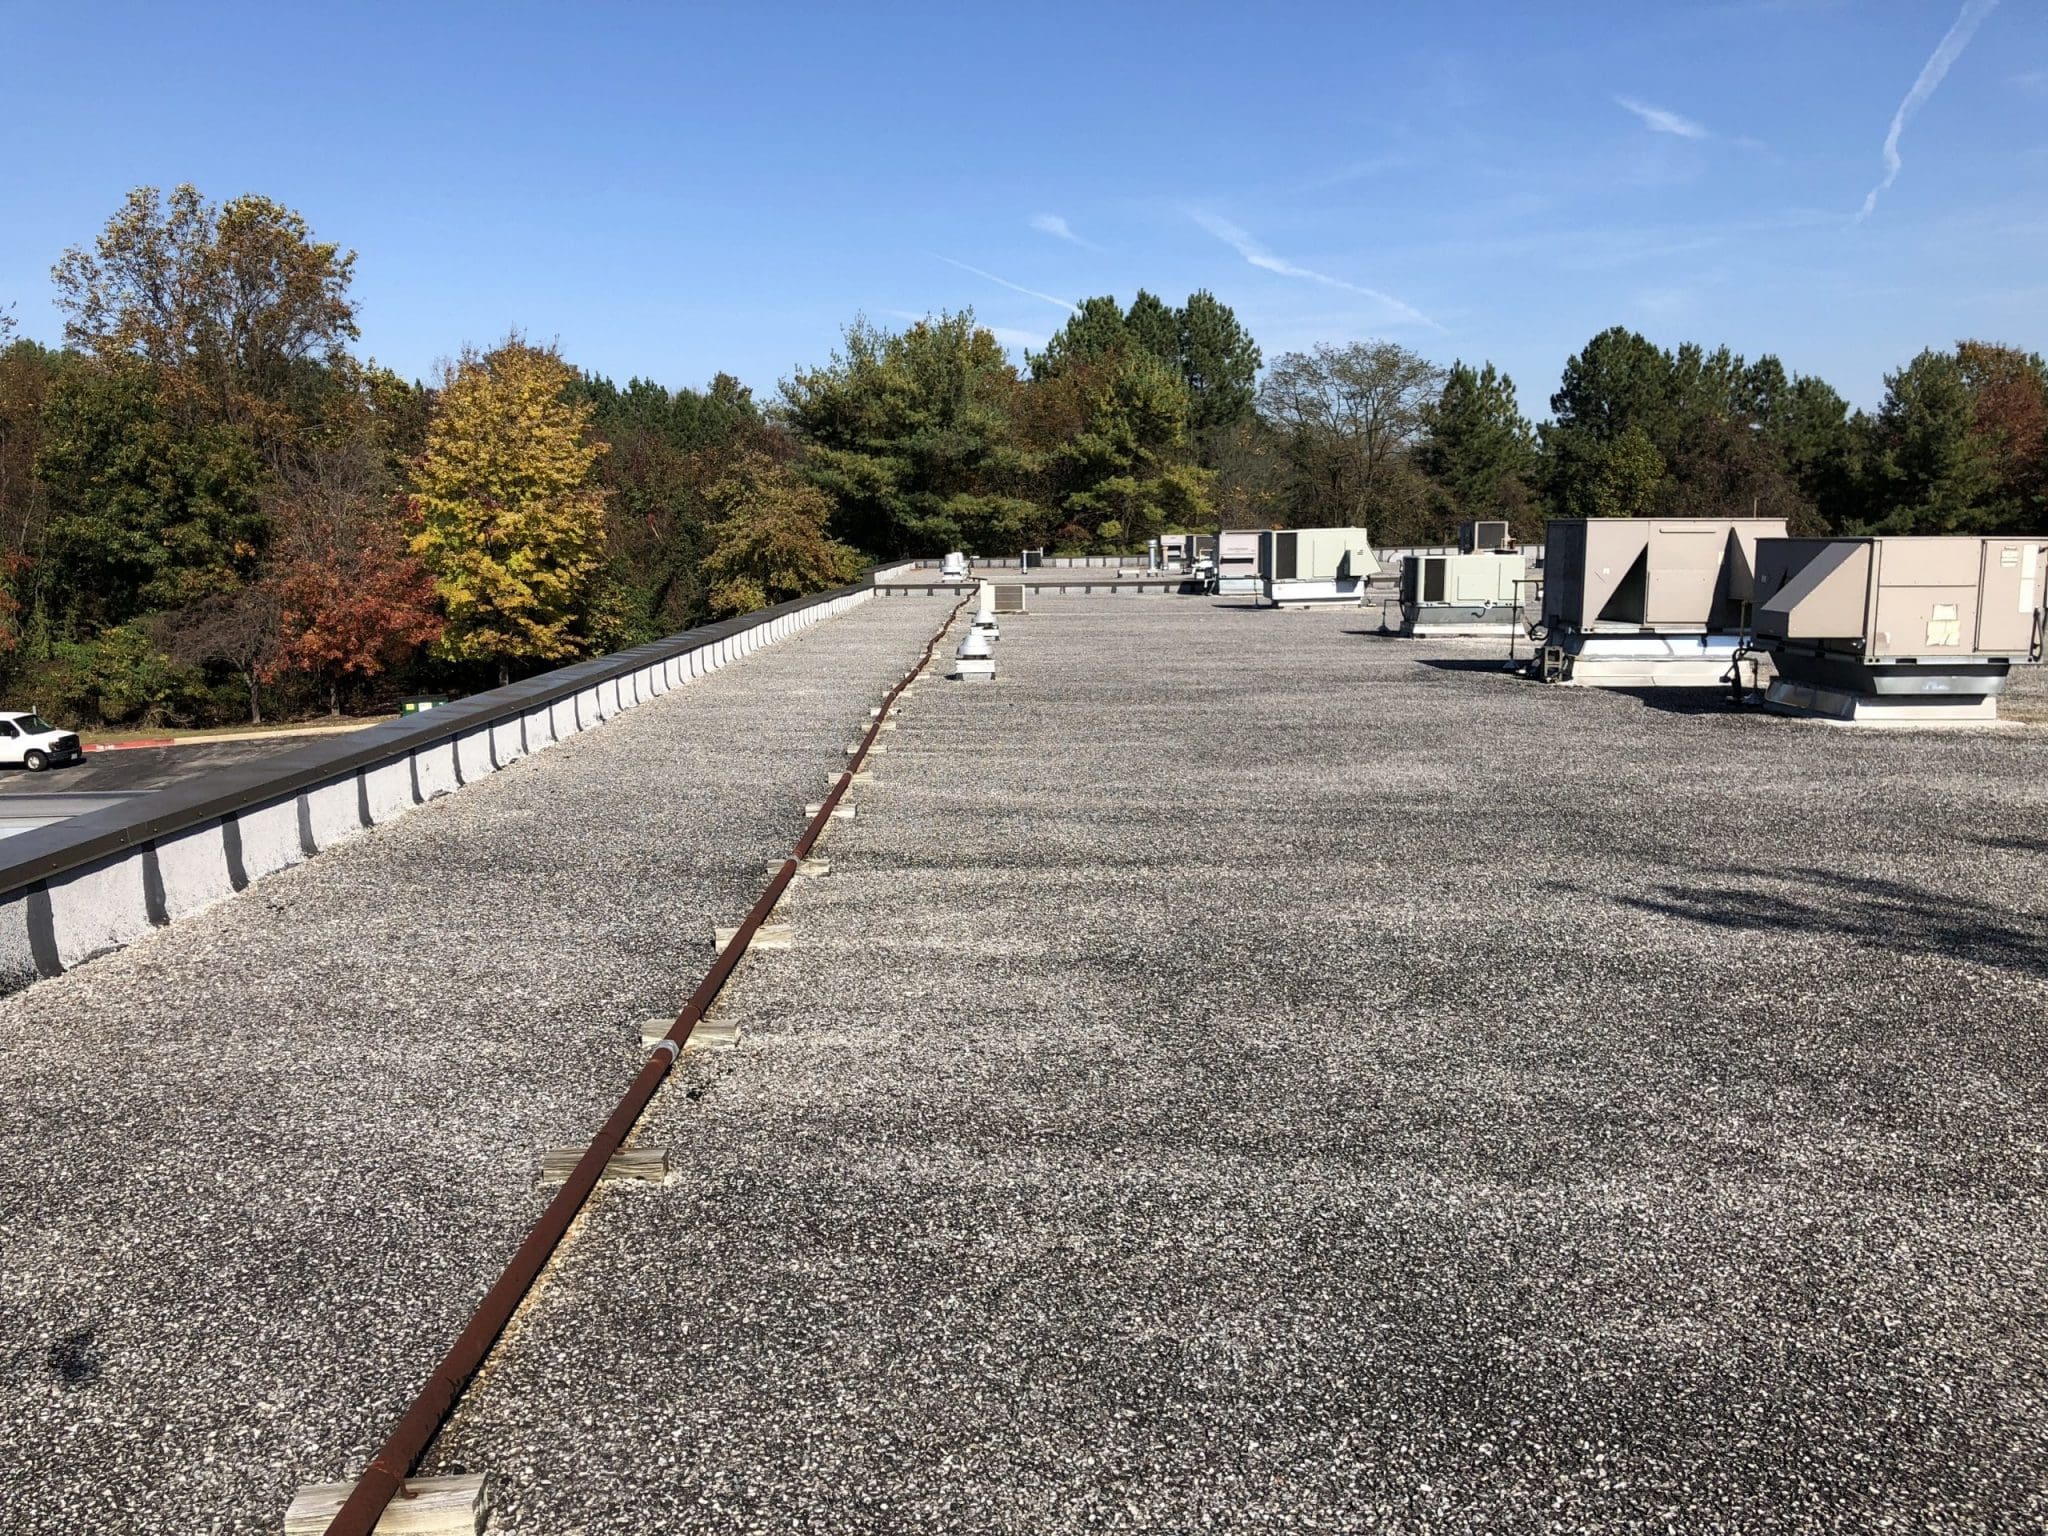 Roof photo before commercial solar installation